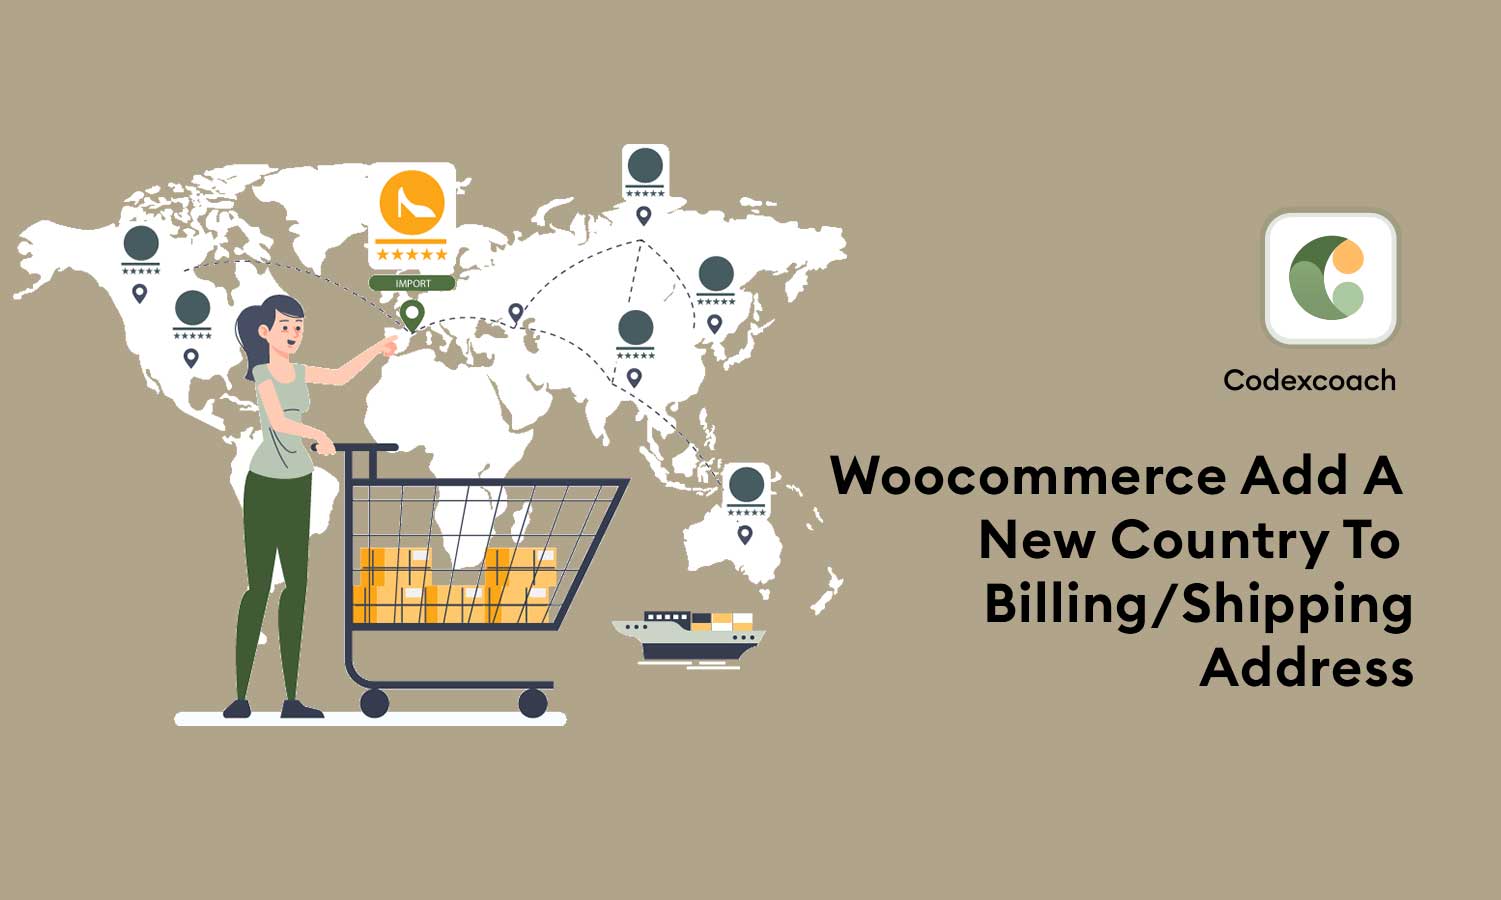 Woocommerce-Add-A-New-Country-To-Billing-Shipping-Address